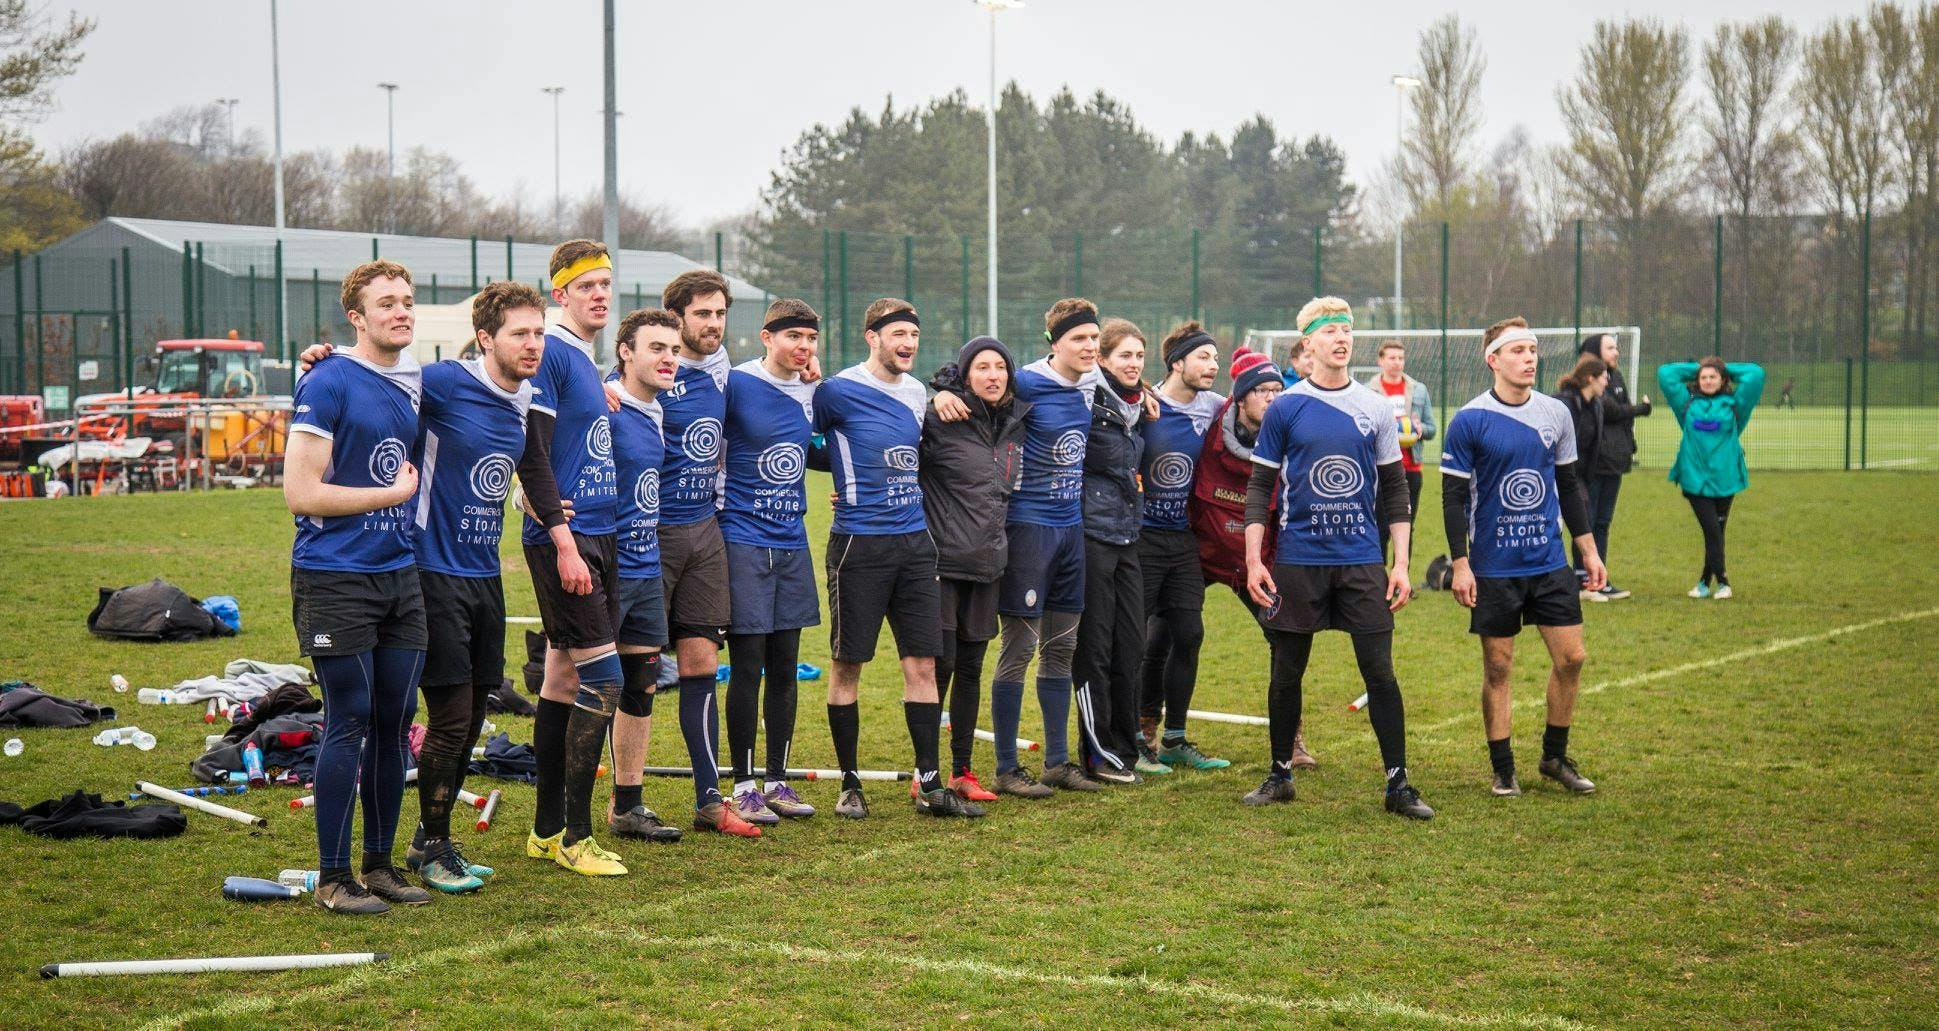 London Quidditch Club await a referees decision linked arm in arm